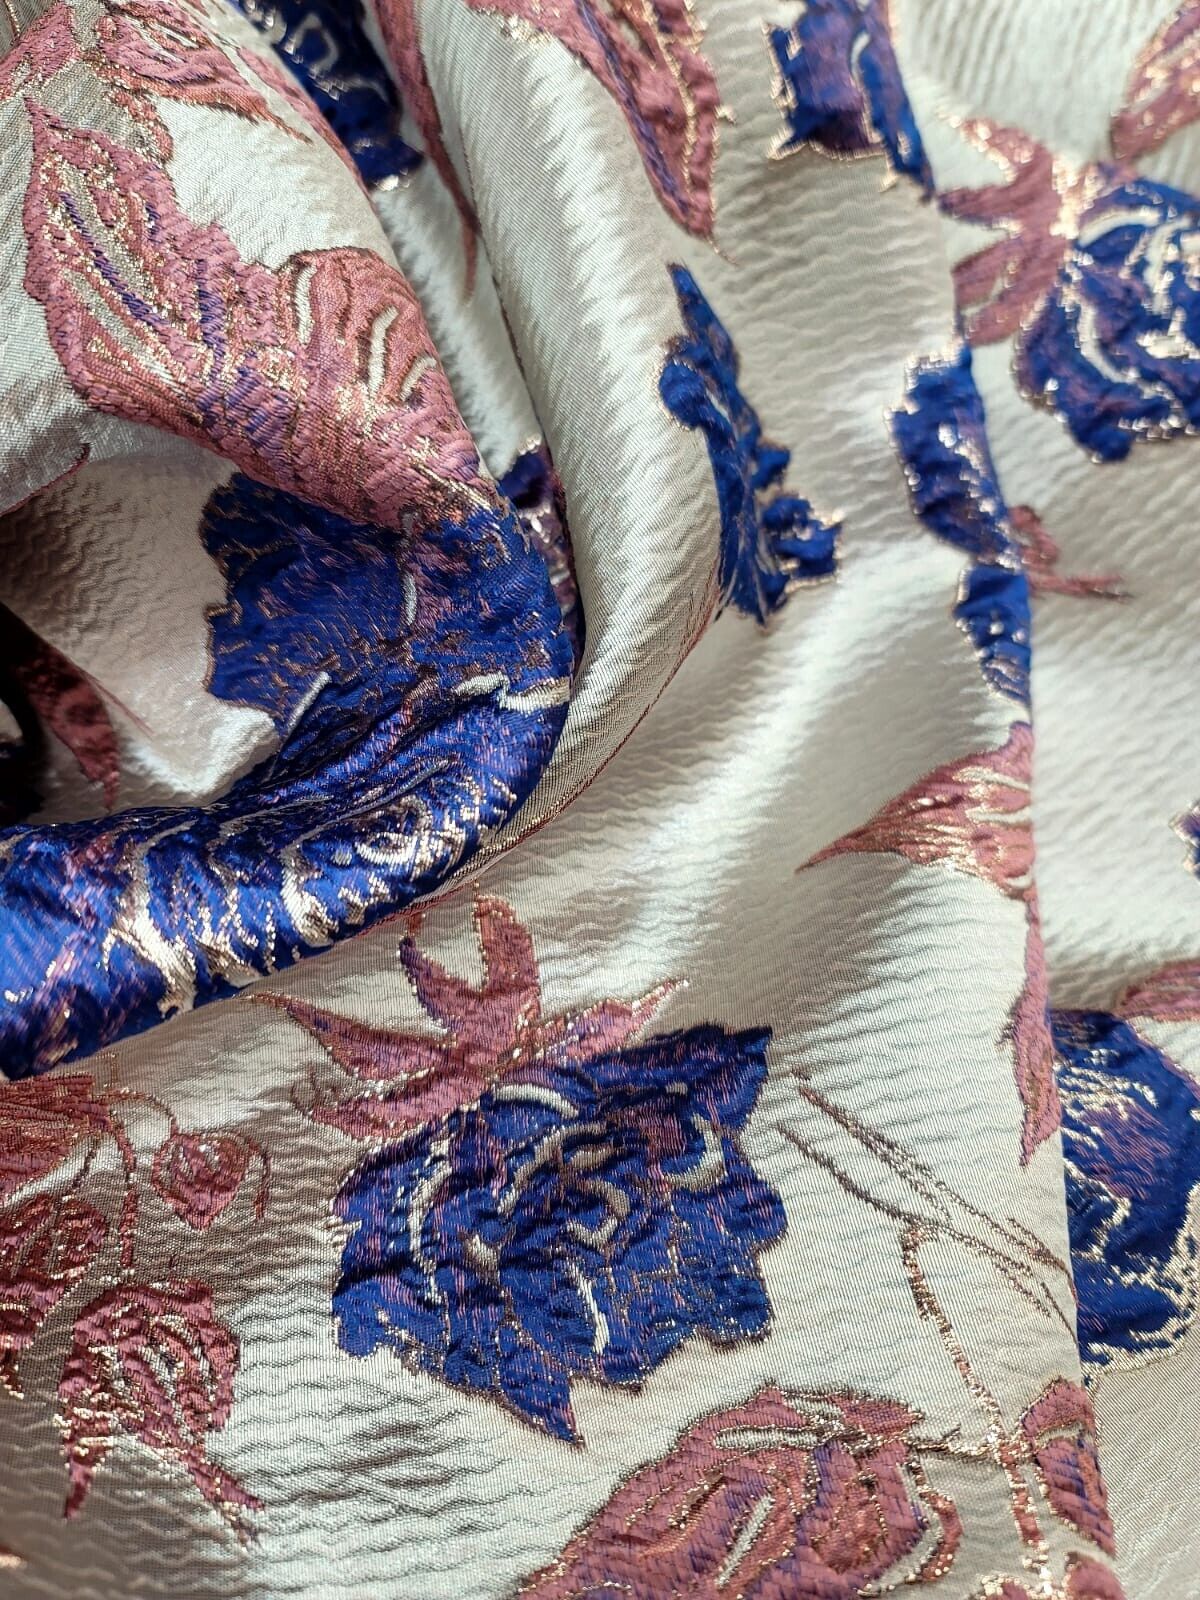 Royal Blue Floral Pink Brocade Fabric Sold By The Yard Rose Gold Metallic